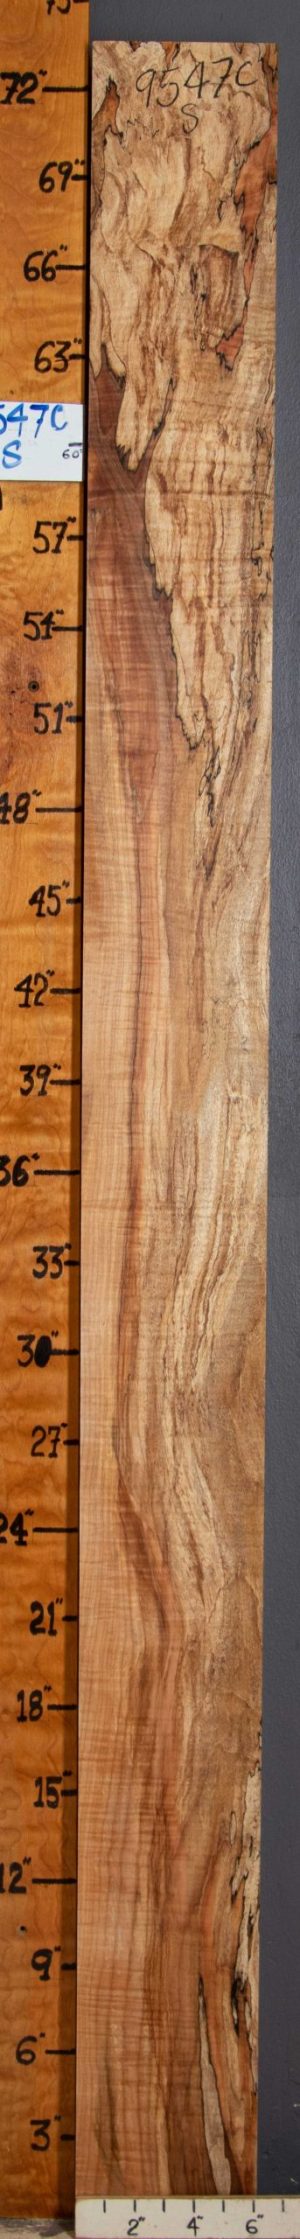 Musical Spalted Curly Maple Lumber 6"1/8 X 73" X 2"1/2 (NWT-9547C)